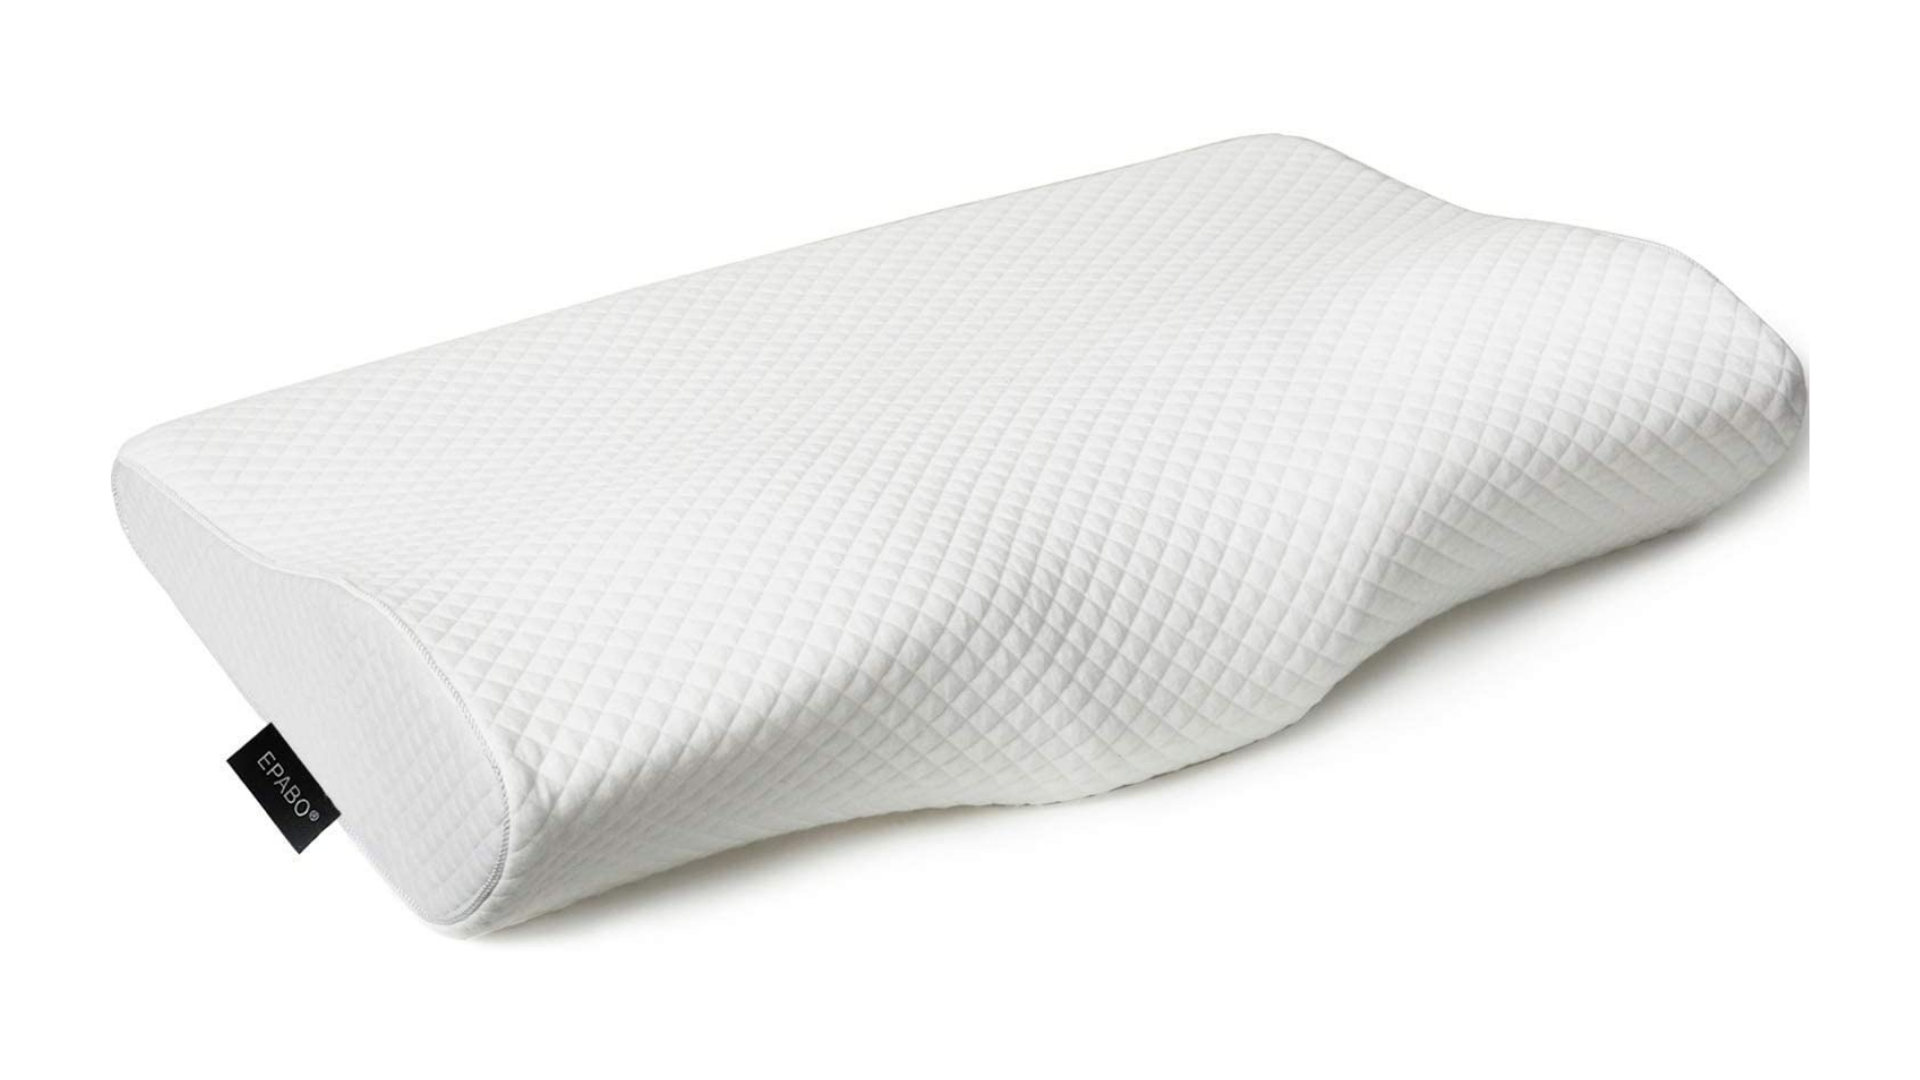 Best Pillows for SideSleepers to Relieve Neck and Shoulder Pain